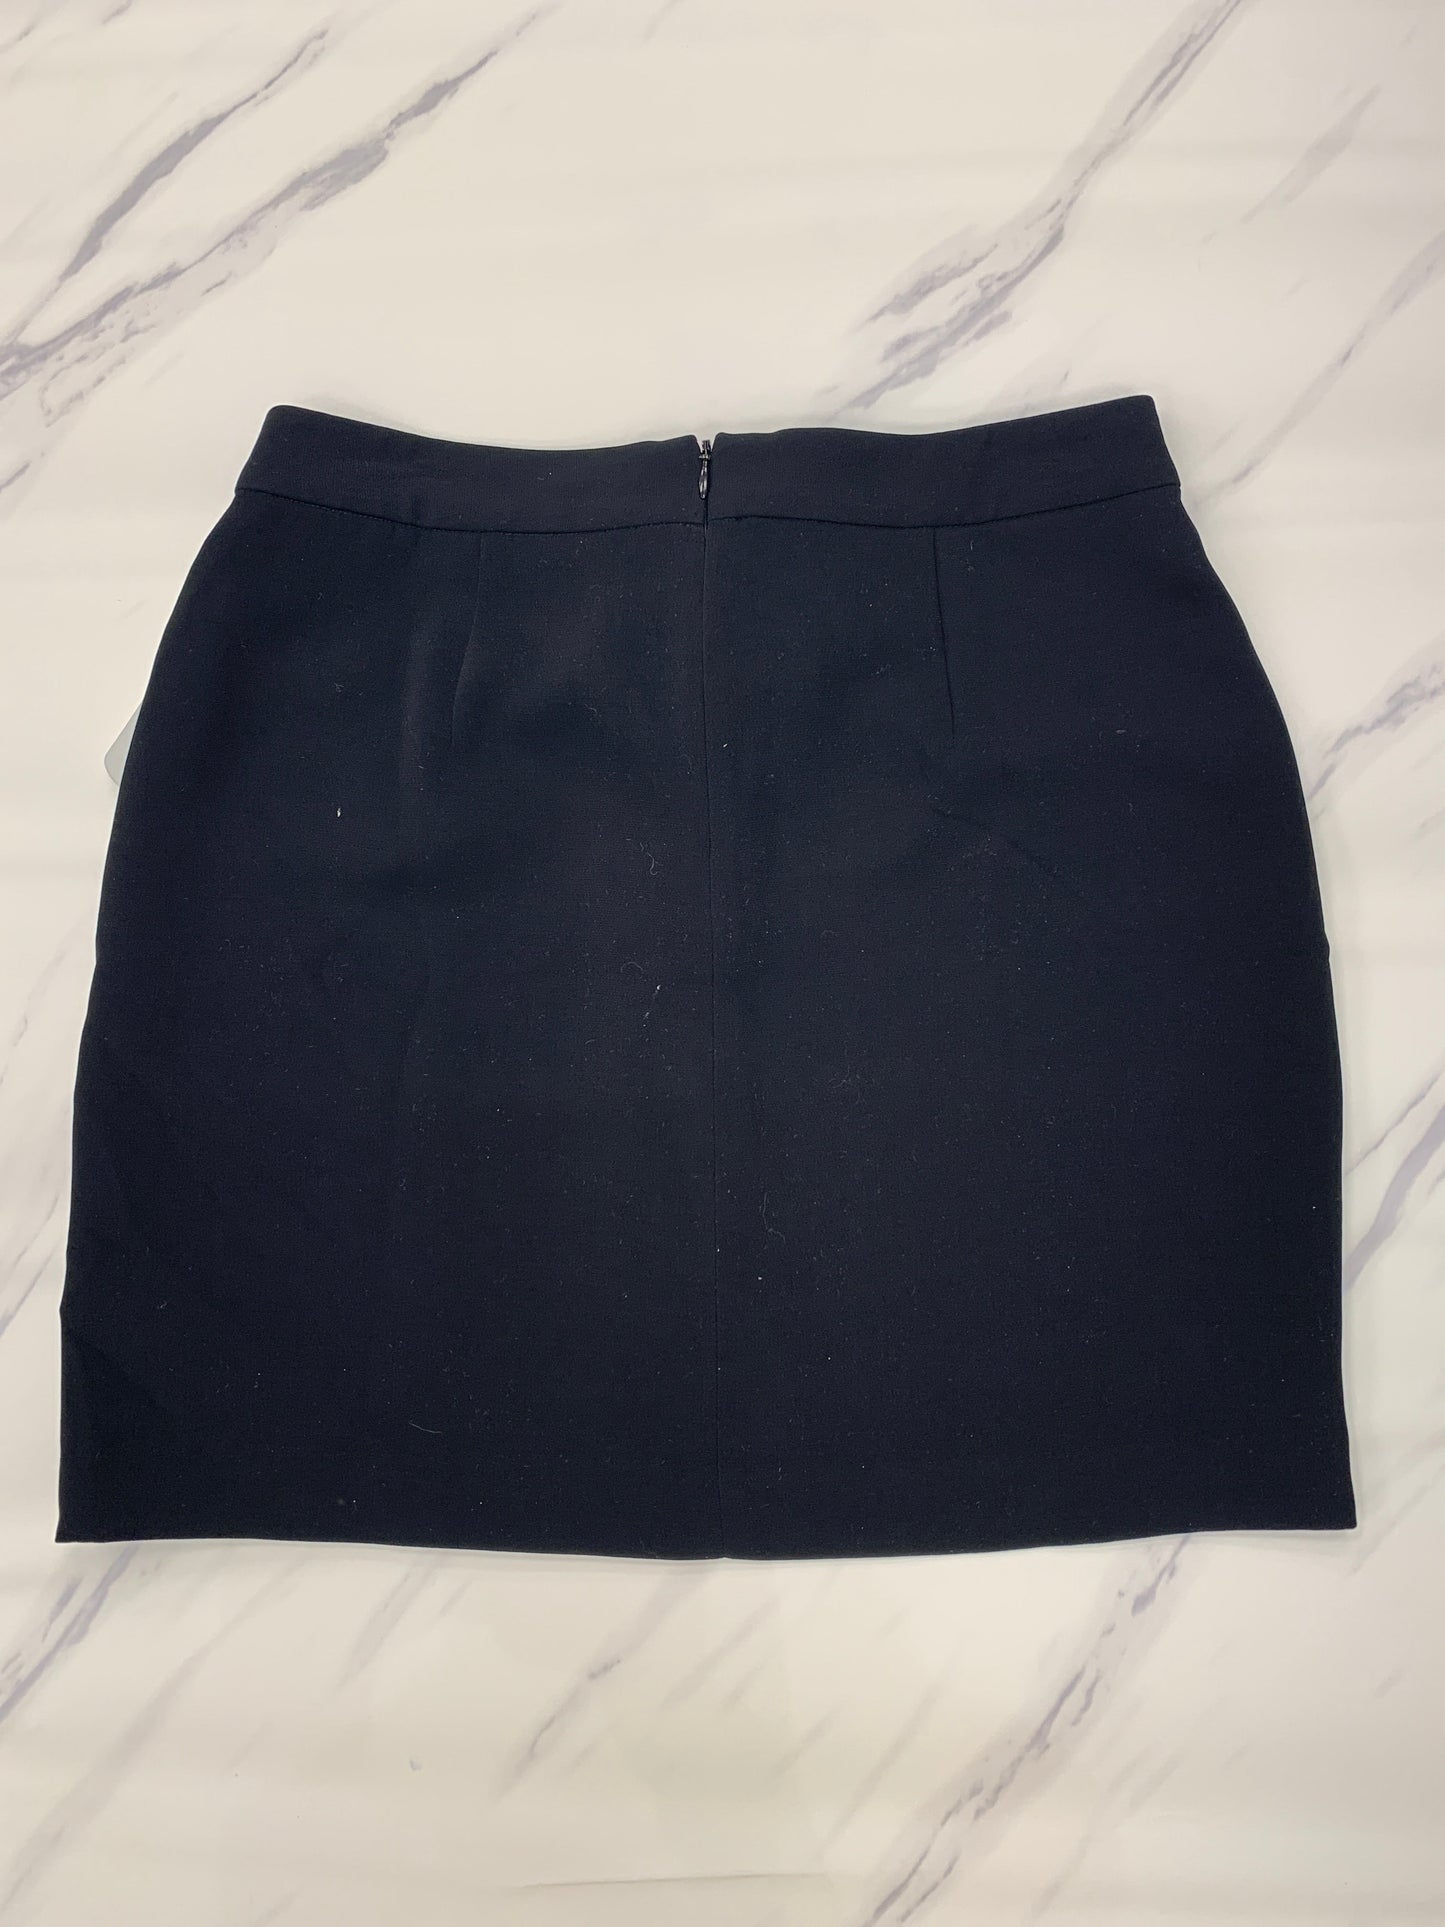 Skirt Mini & Short By Madewell  Size: 2